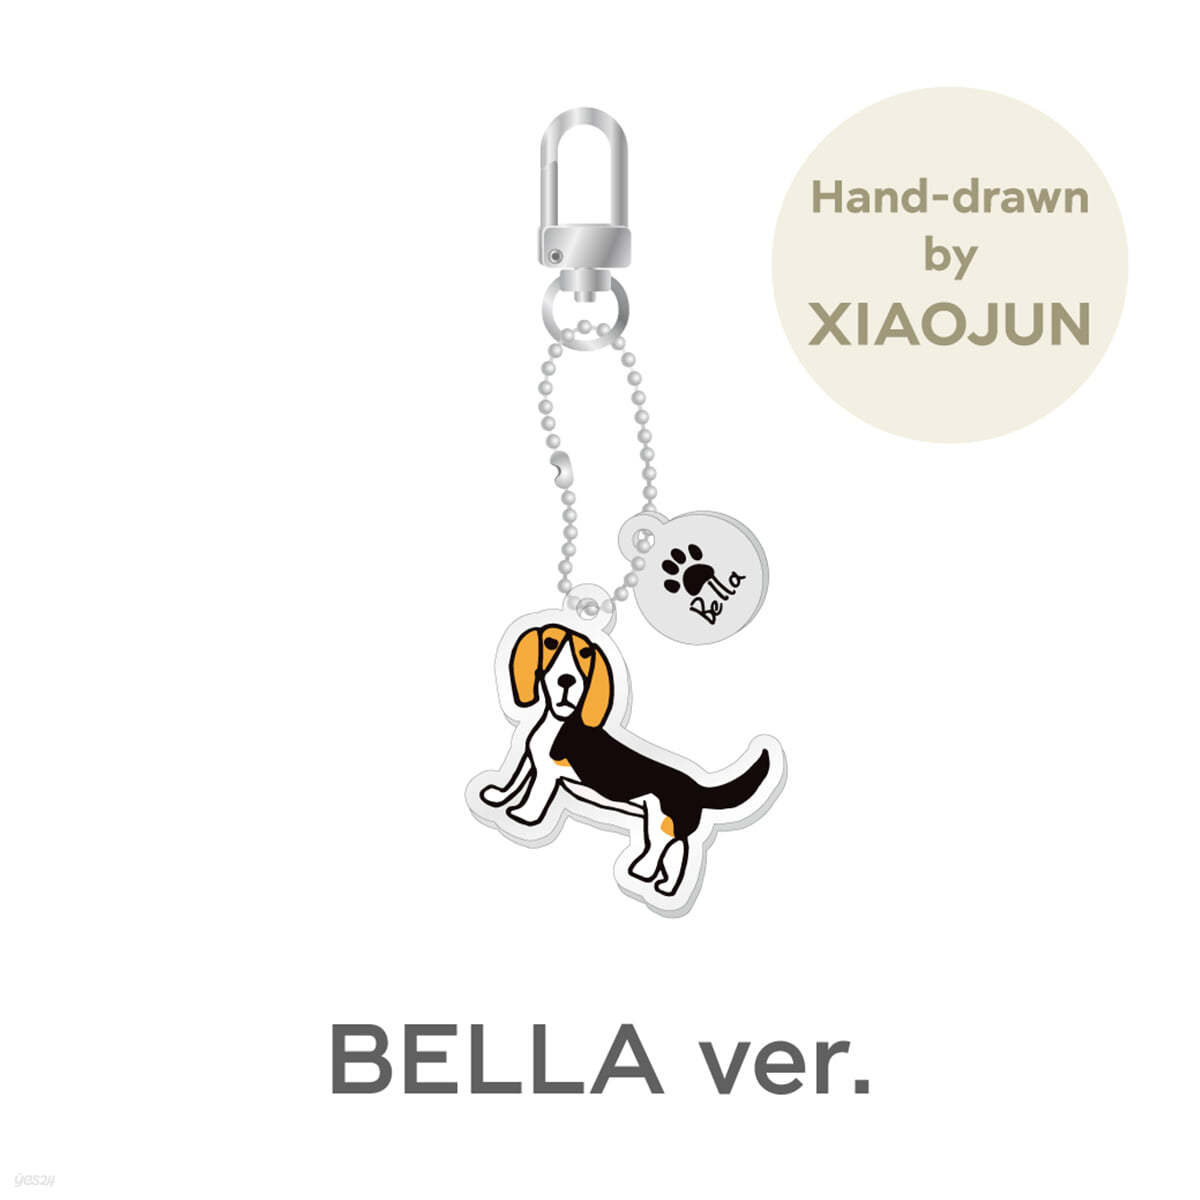 [XIAOJUN] ACRYLIC KEY RING CHARM_BELLA Ver. [Our Home : WayV with Little Friends]